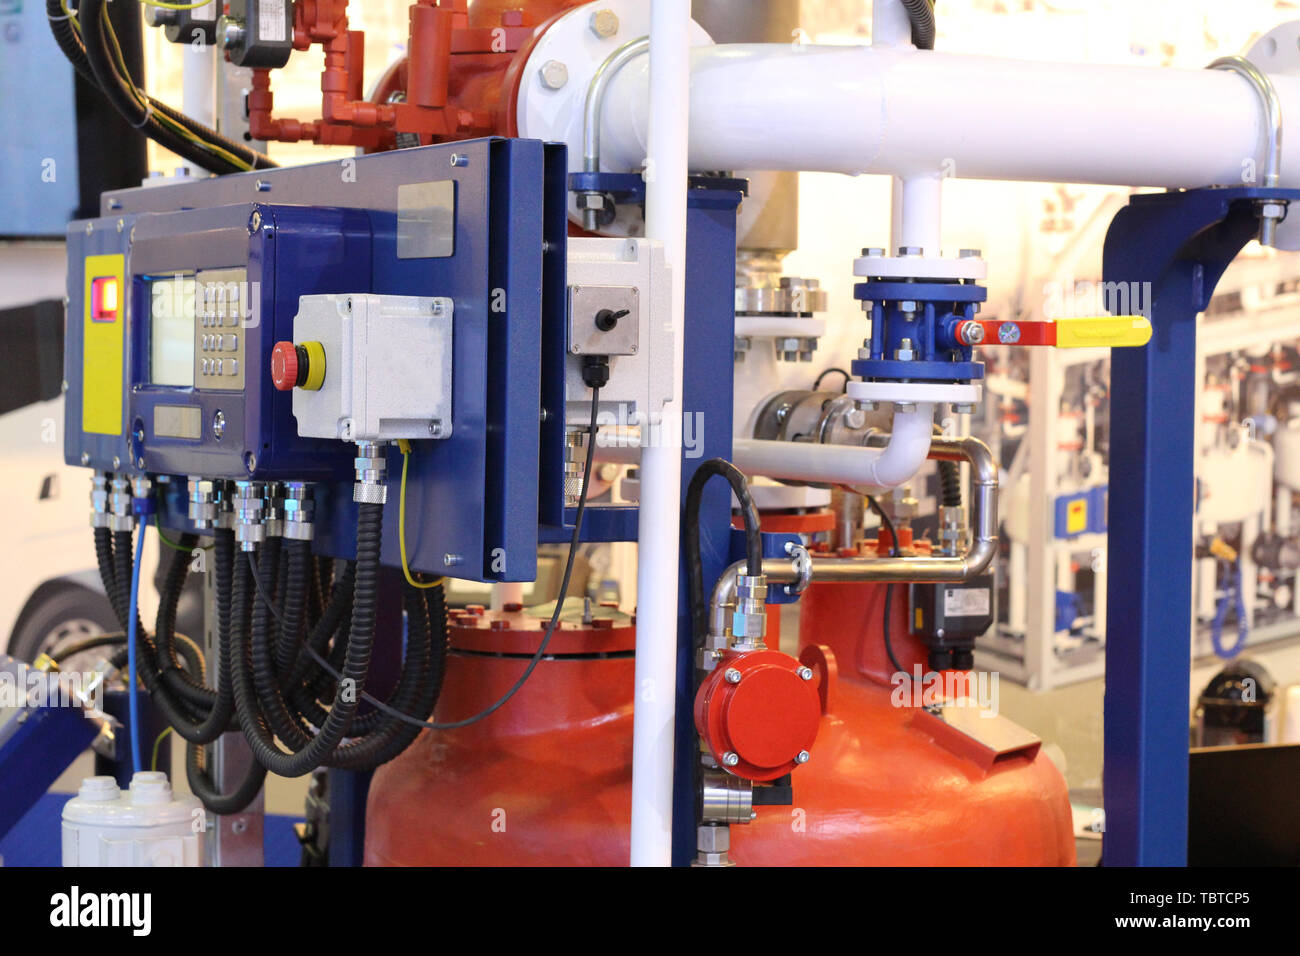 Oil and gas equipment at the plant. Pipes through which gas flows. Oil and gas industry. Production. Stock Photo